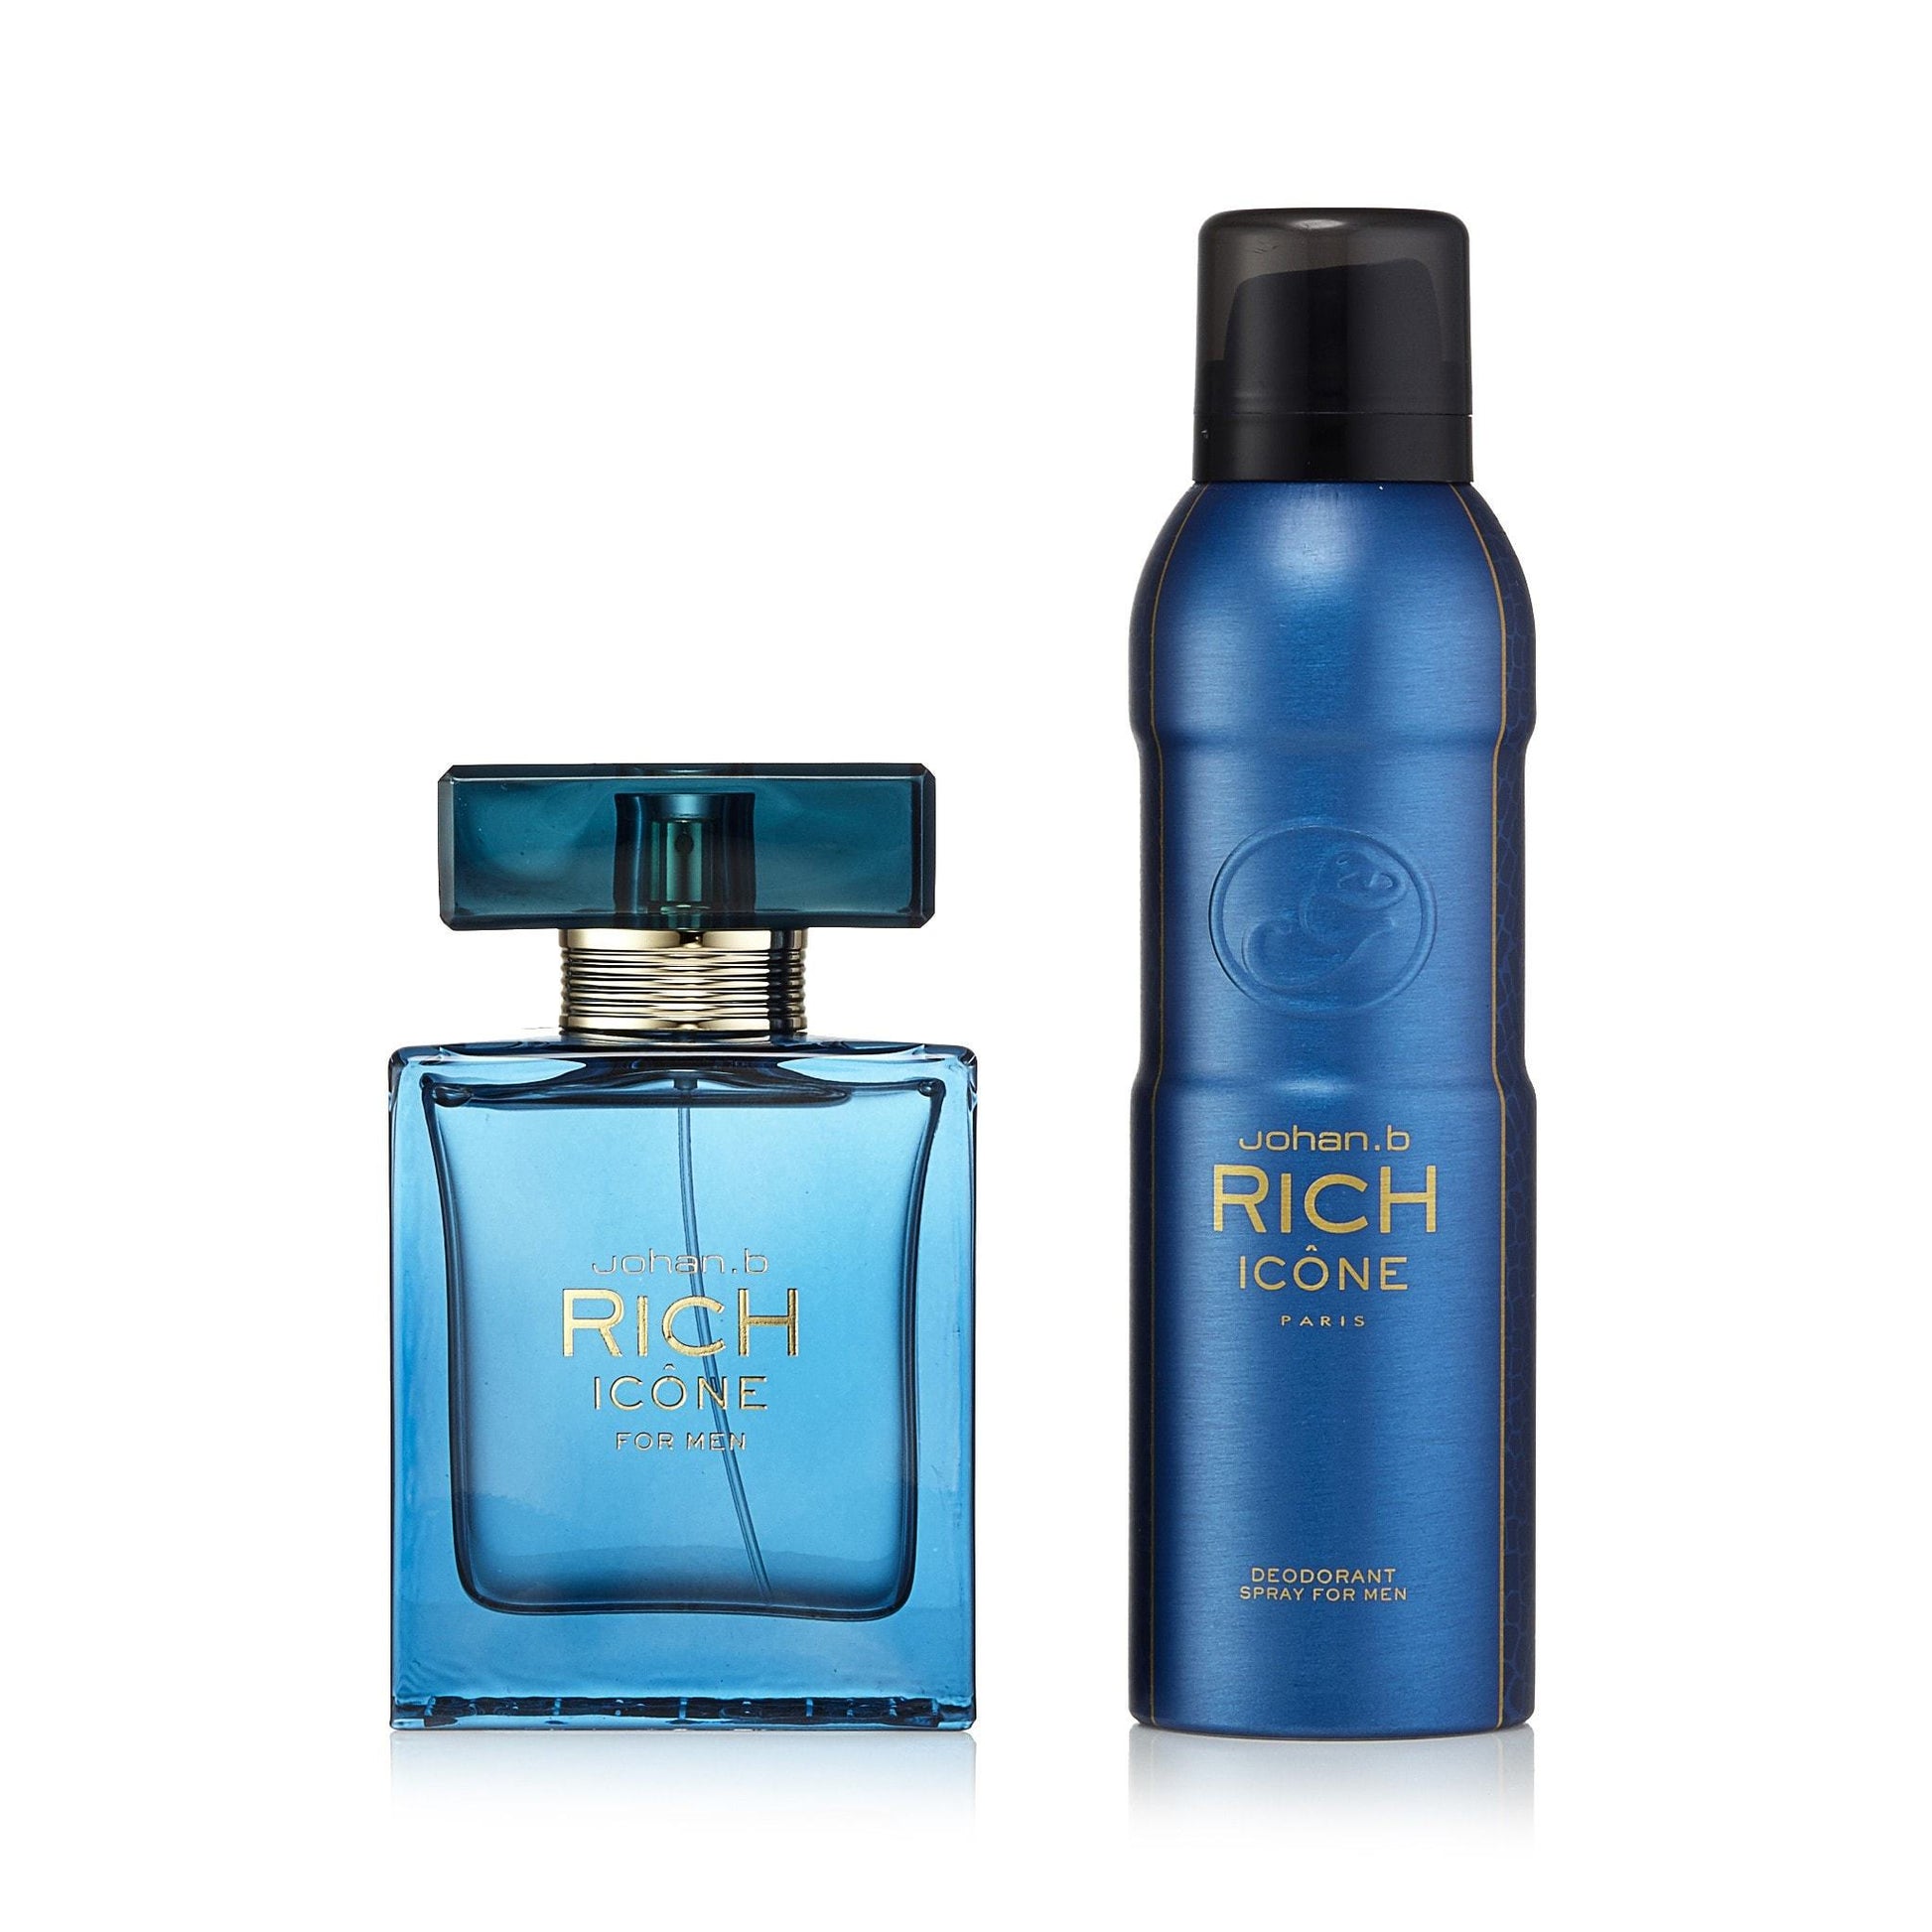 Rich Icone Gift Set for Men, Product image 1